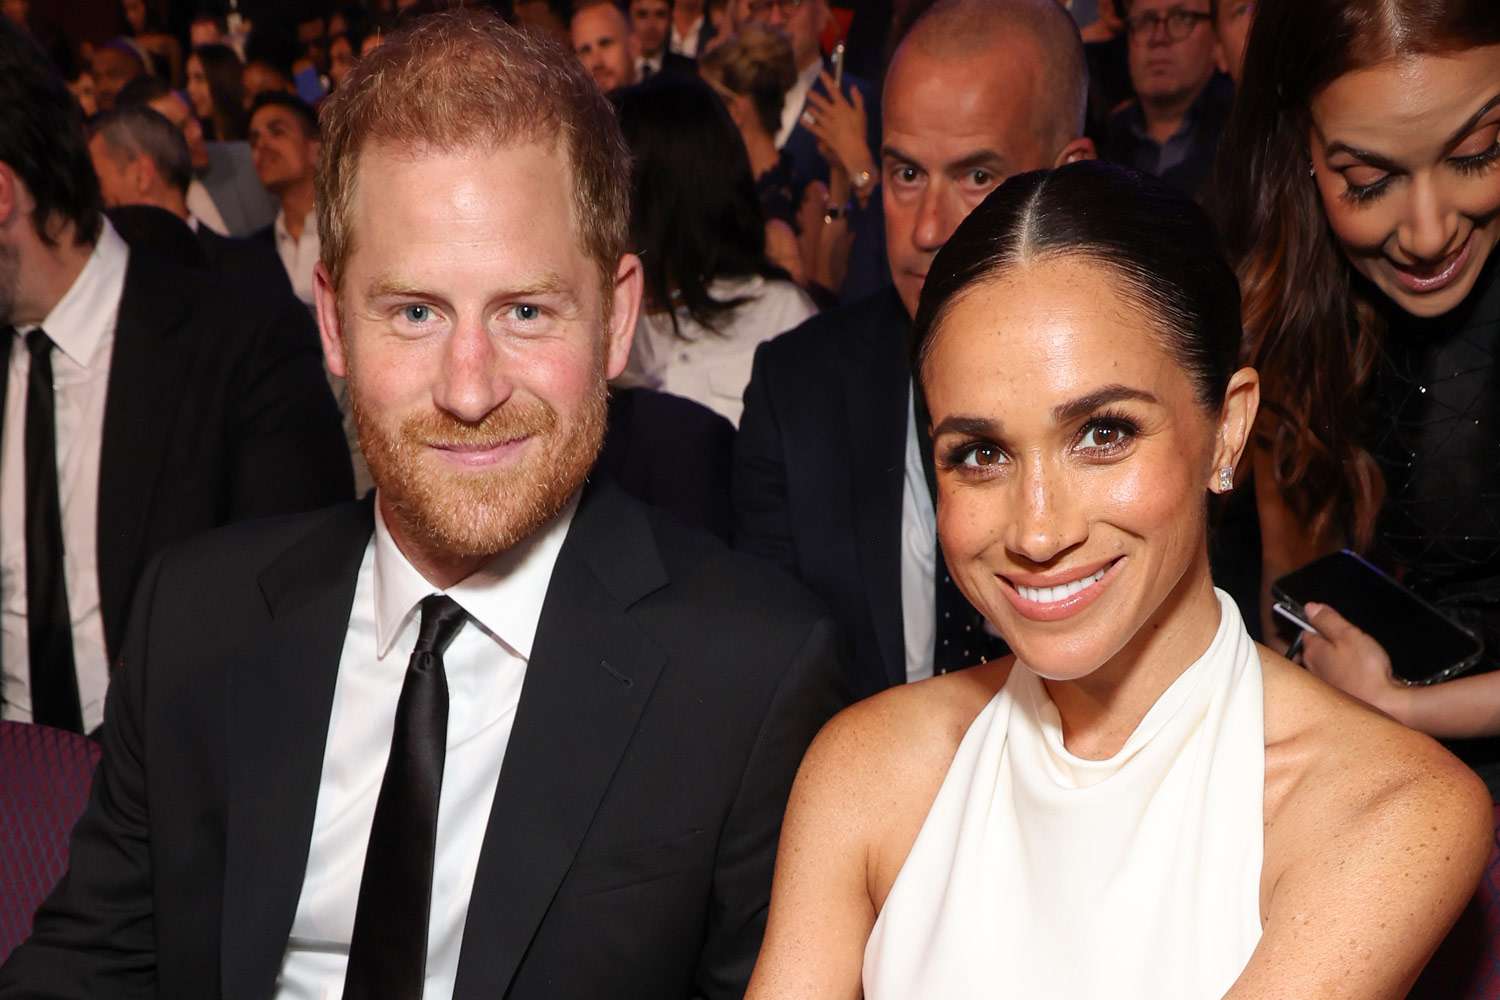 Meghan Markle Wishes Prince Harry Could 'Let Go' of Lawsuits: 'She Wants Him to Be Free' (Exclusive)